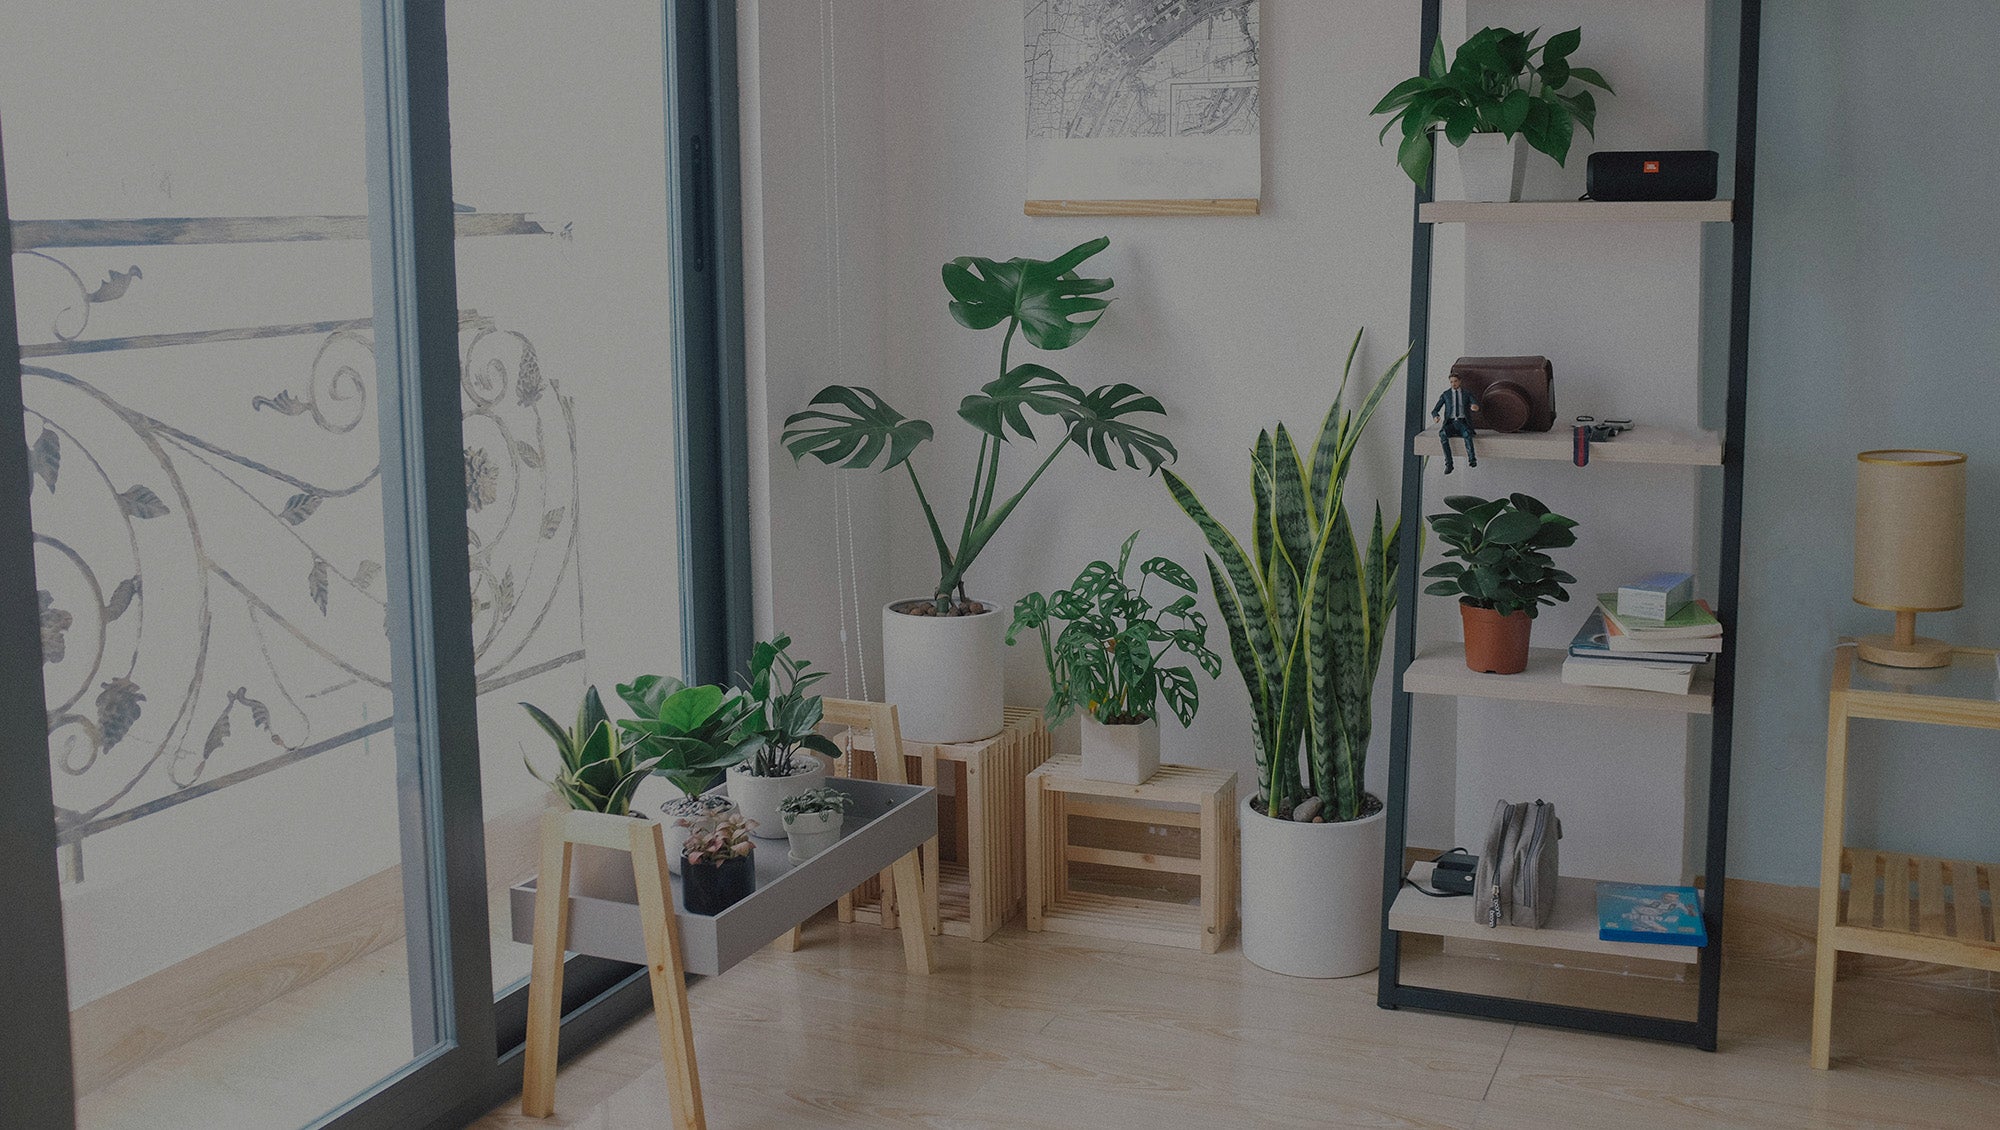 The perfect guide to choose the light intensity for indoor plants